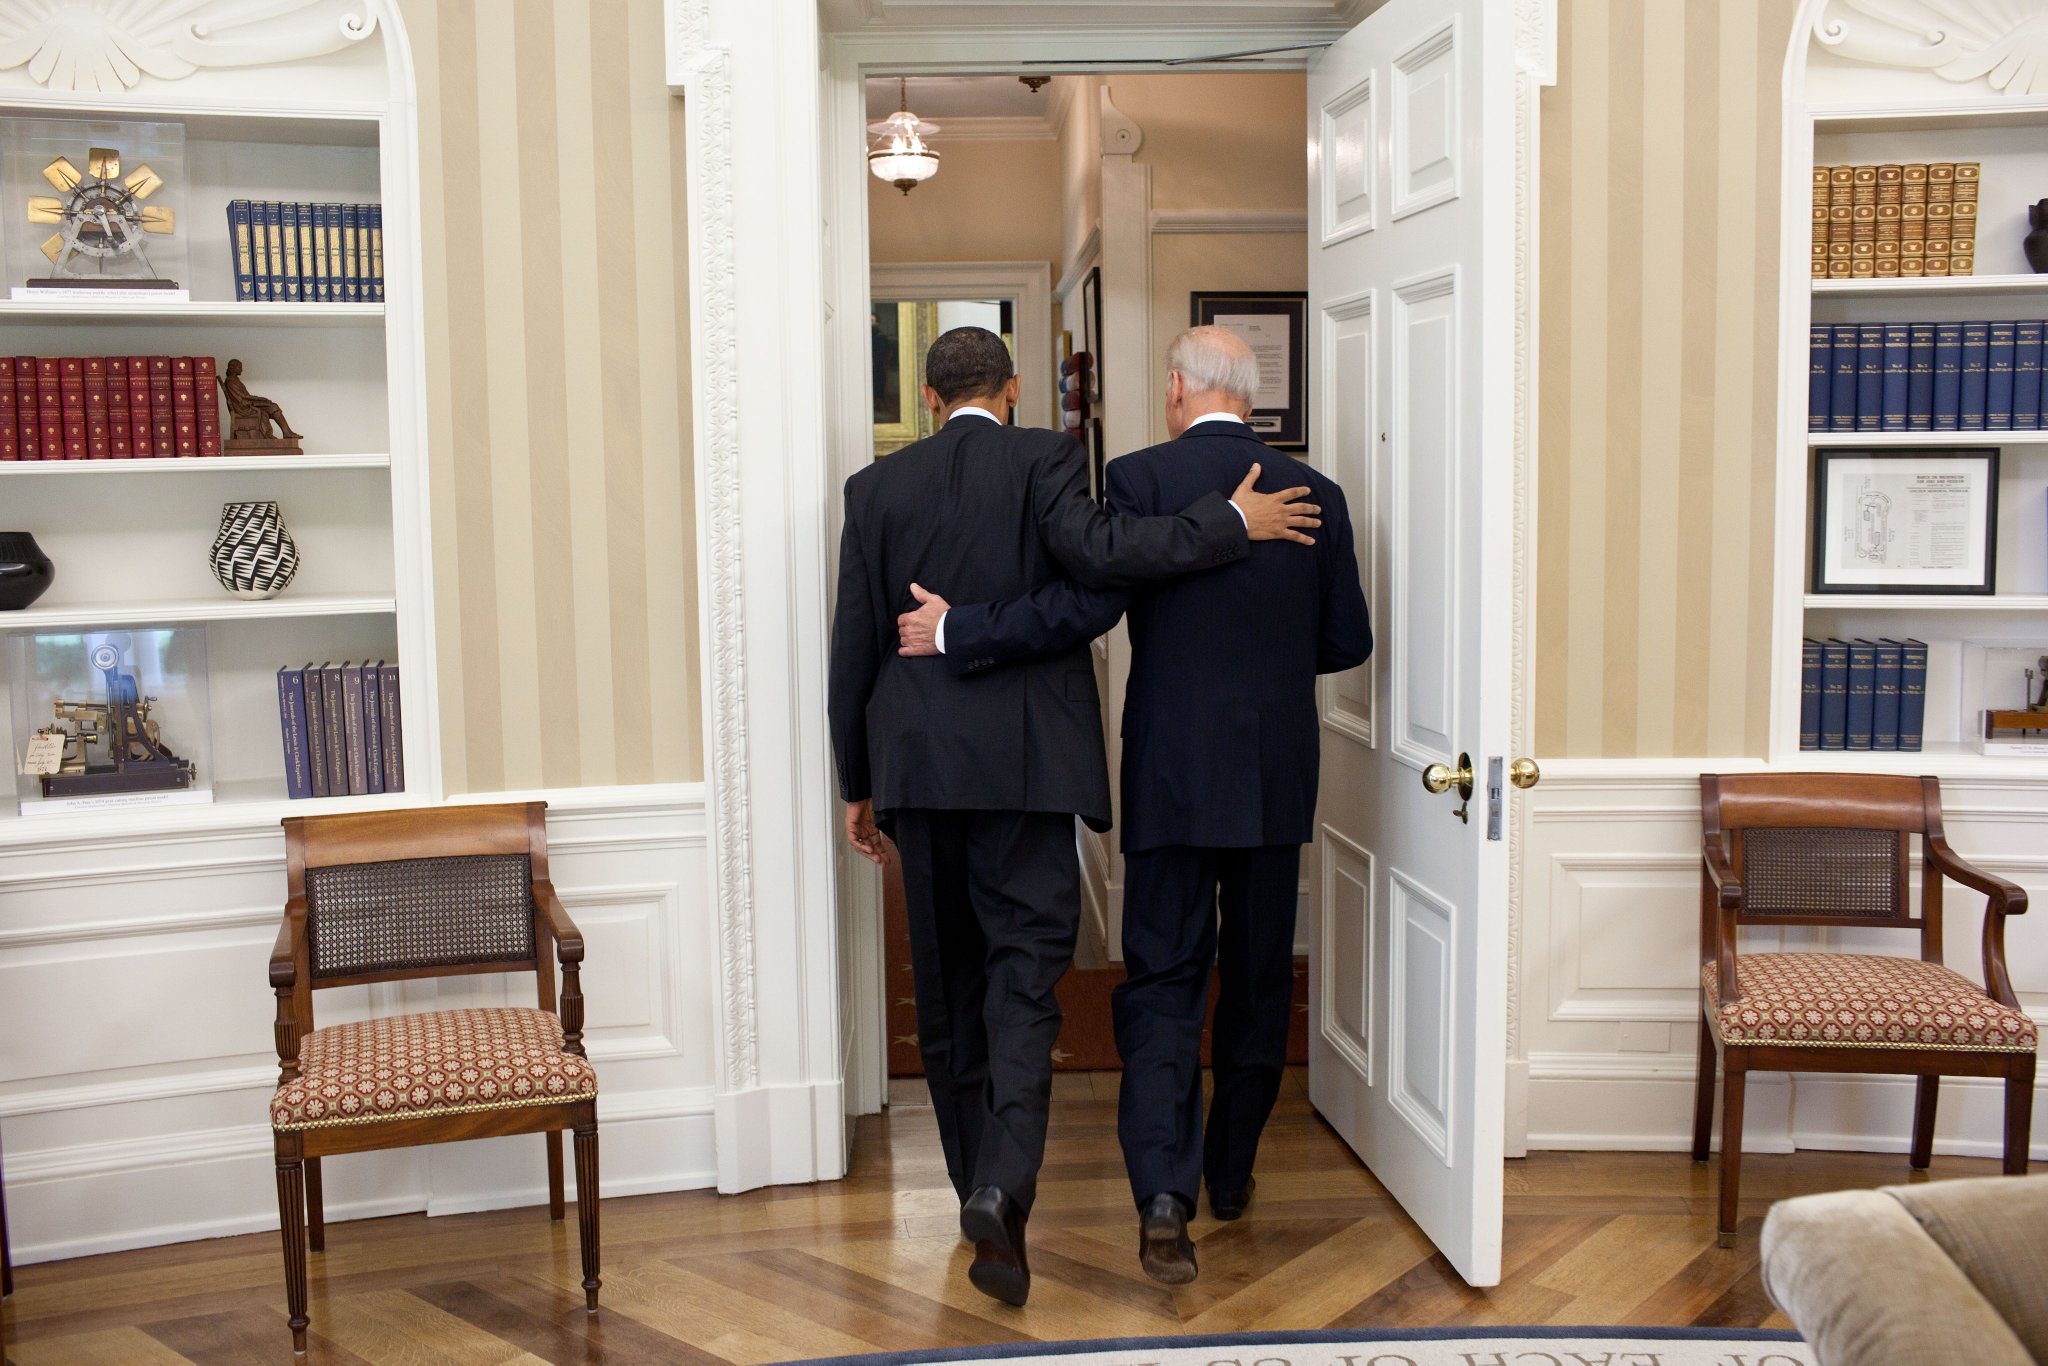 “Not just because you have been a great Vice President, but because in the bargain, I gained a brother.” — POTUS